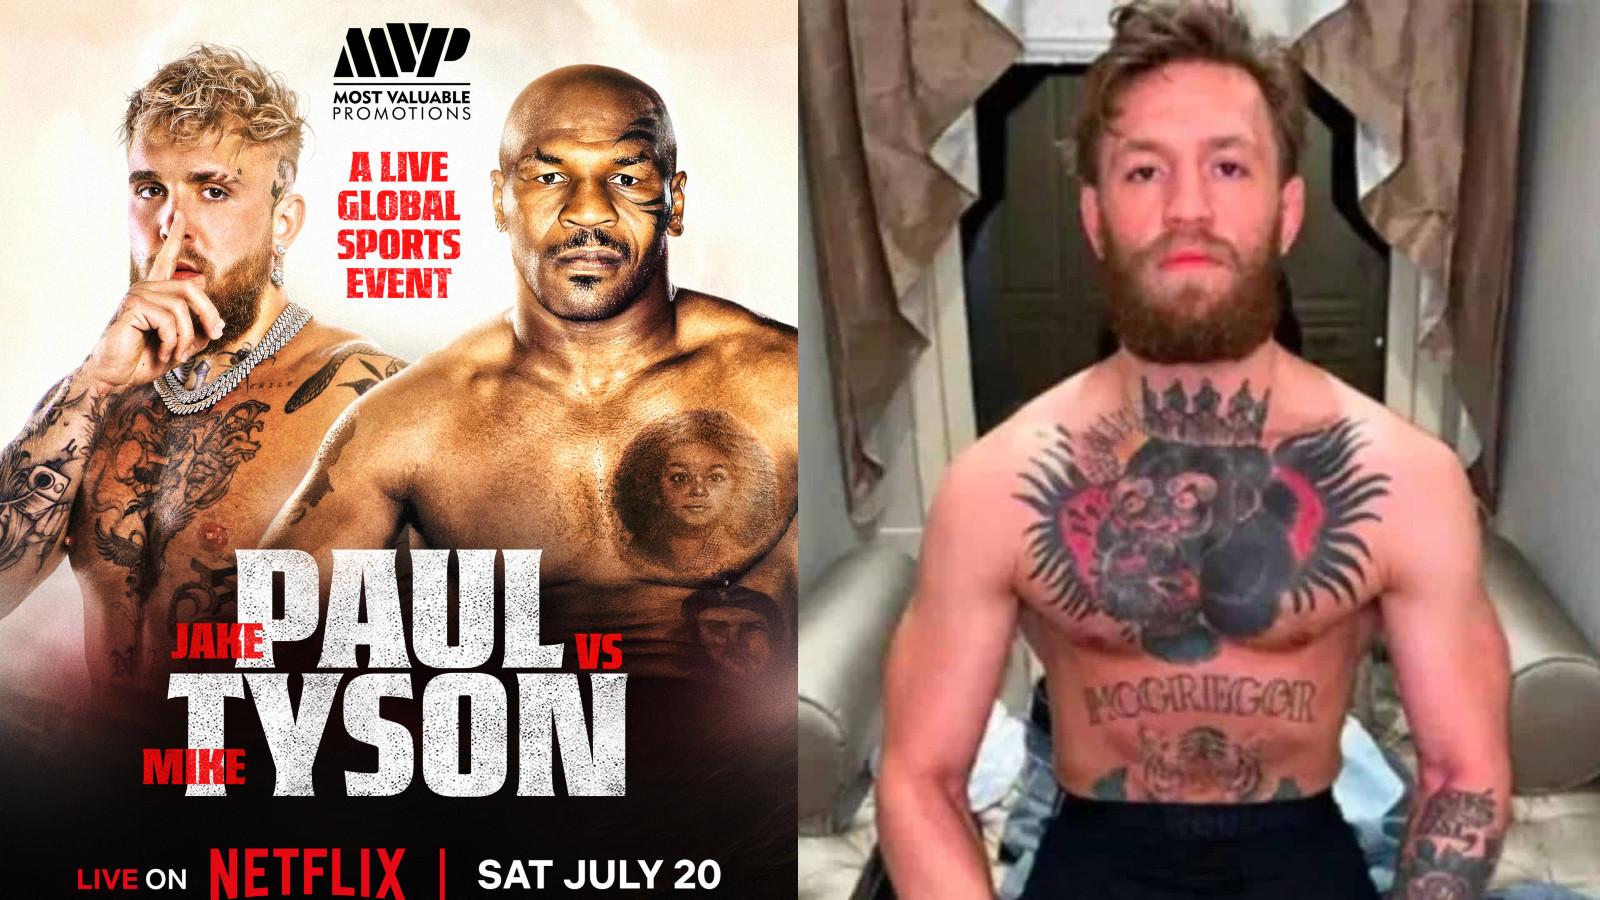 Conor McGregor shirtless next to Jake Paul vs Mike Tyson announcement